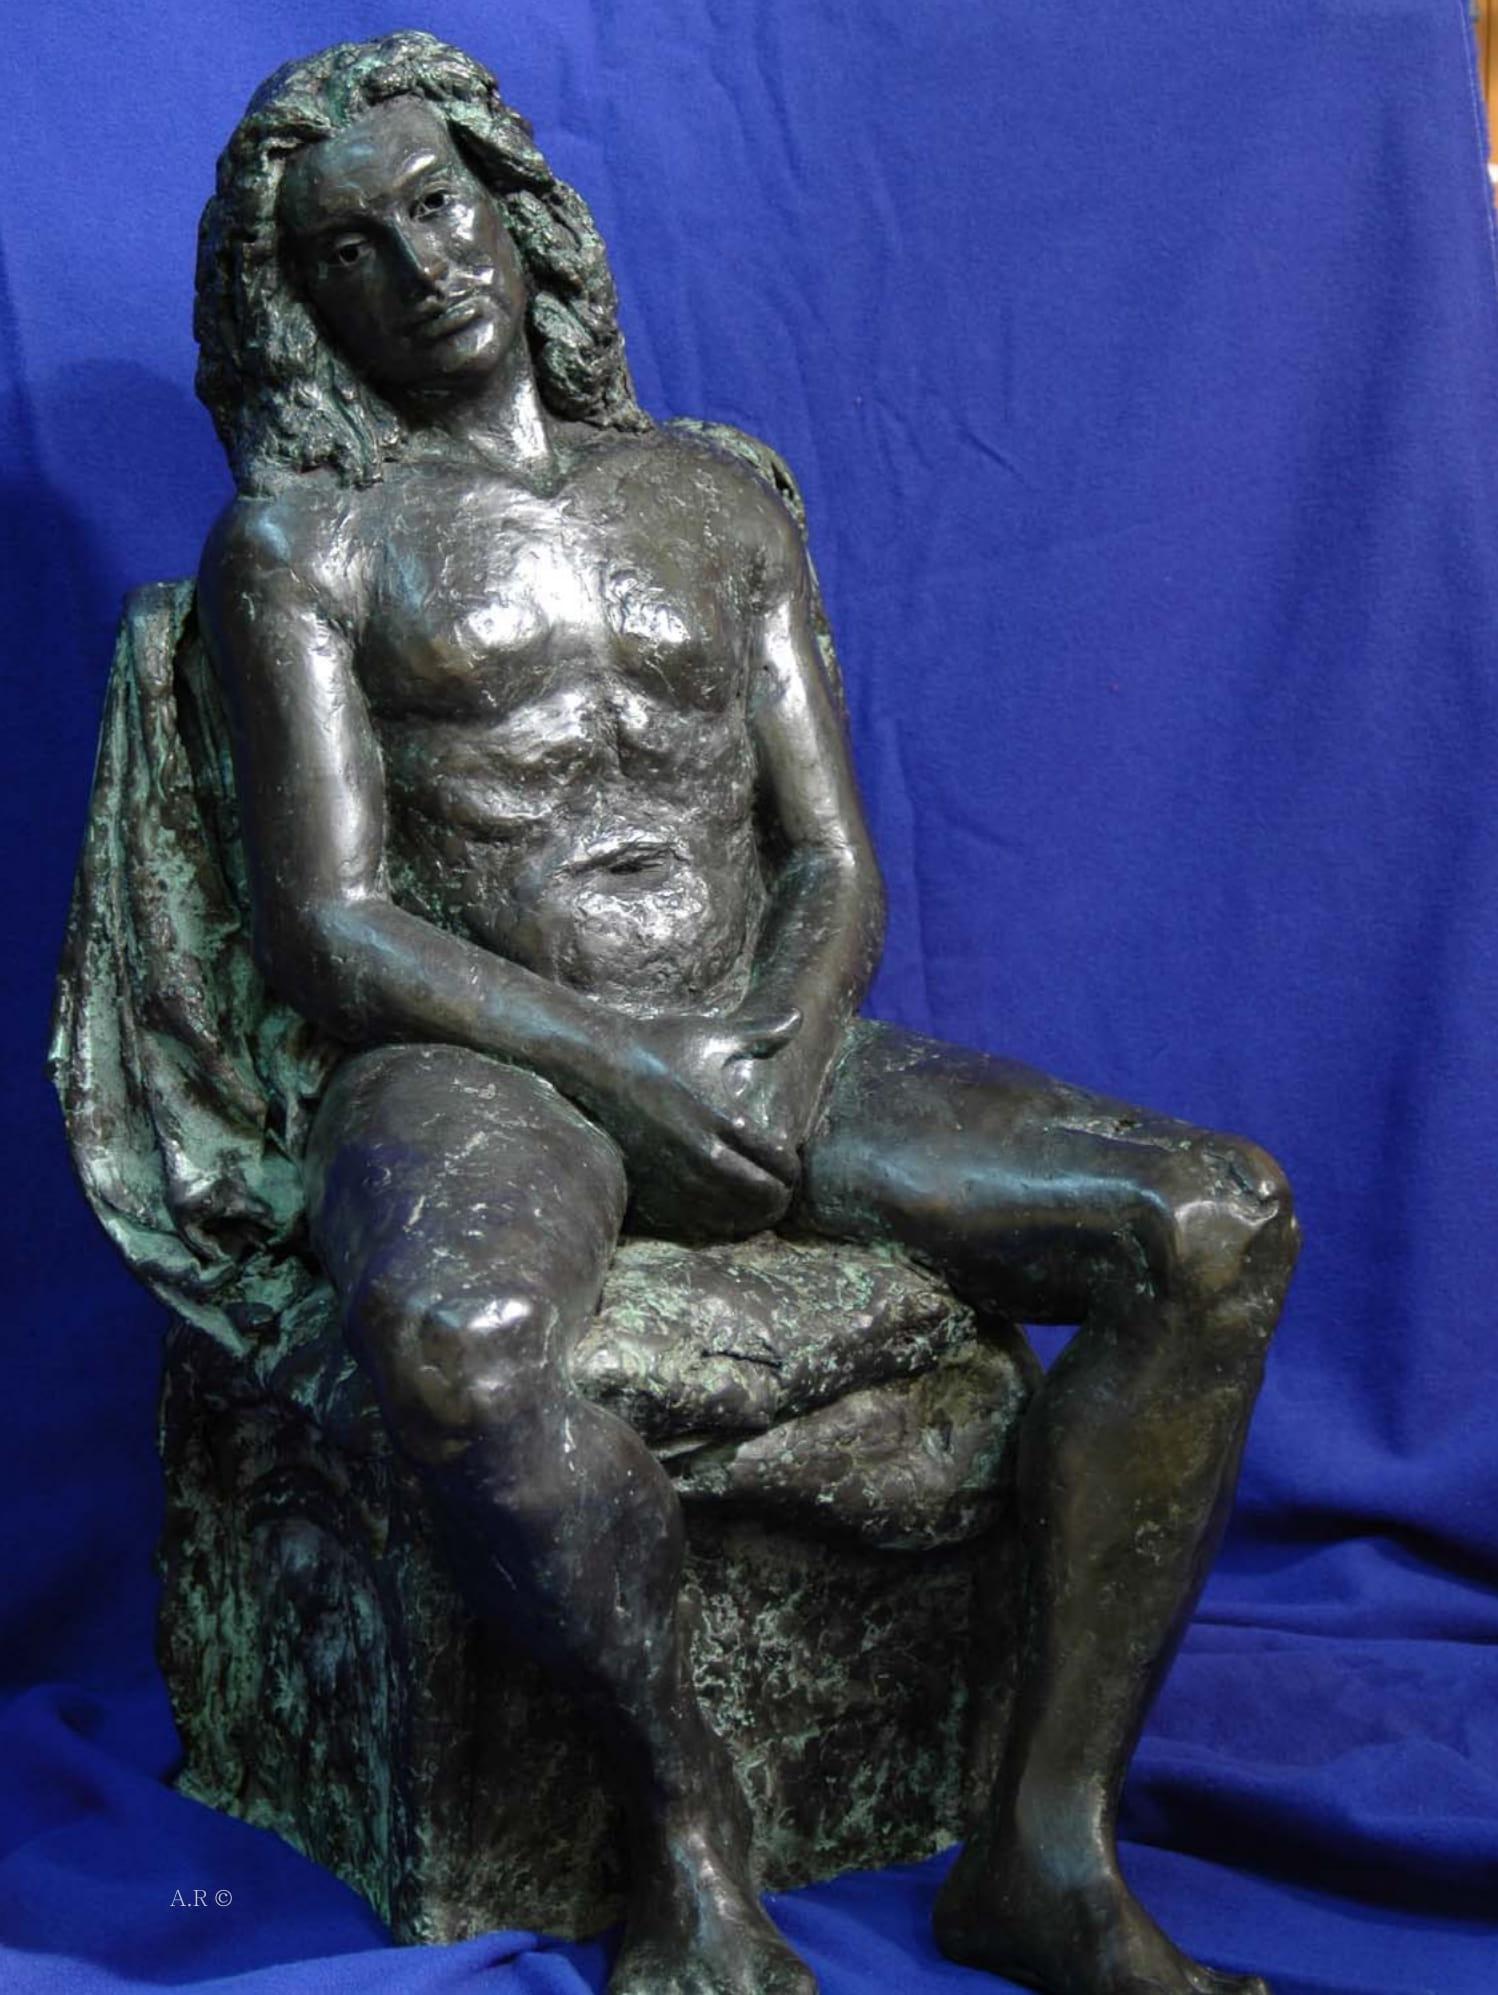 Rembrandt in Bronze - "Seated Male Nude" - unique etching sculpture